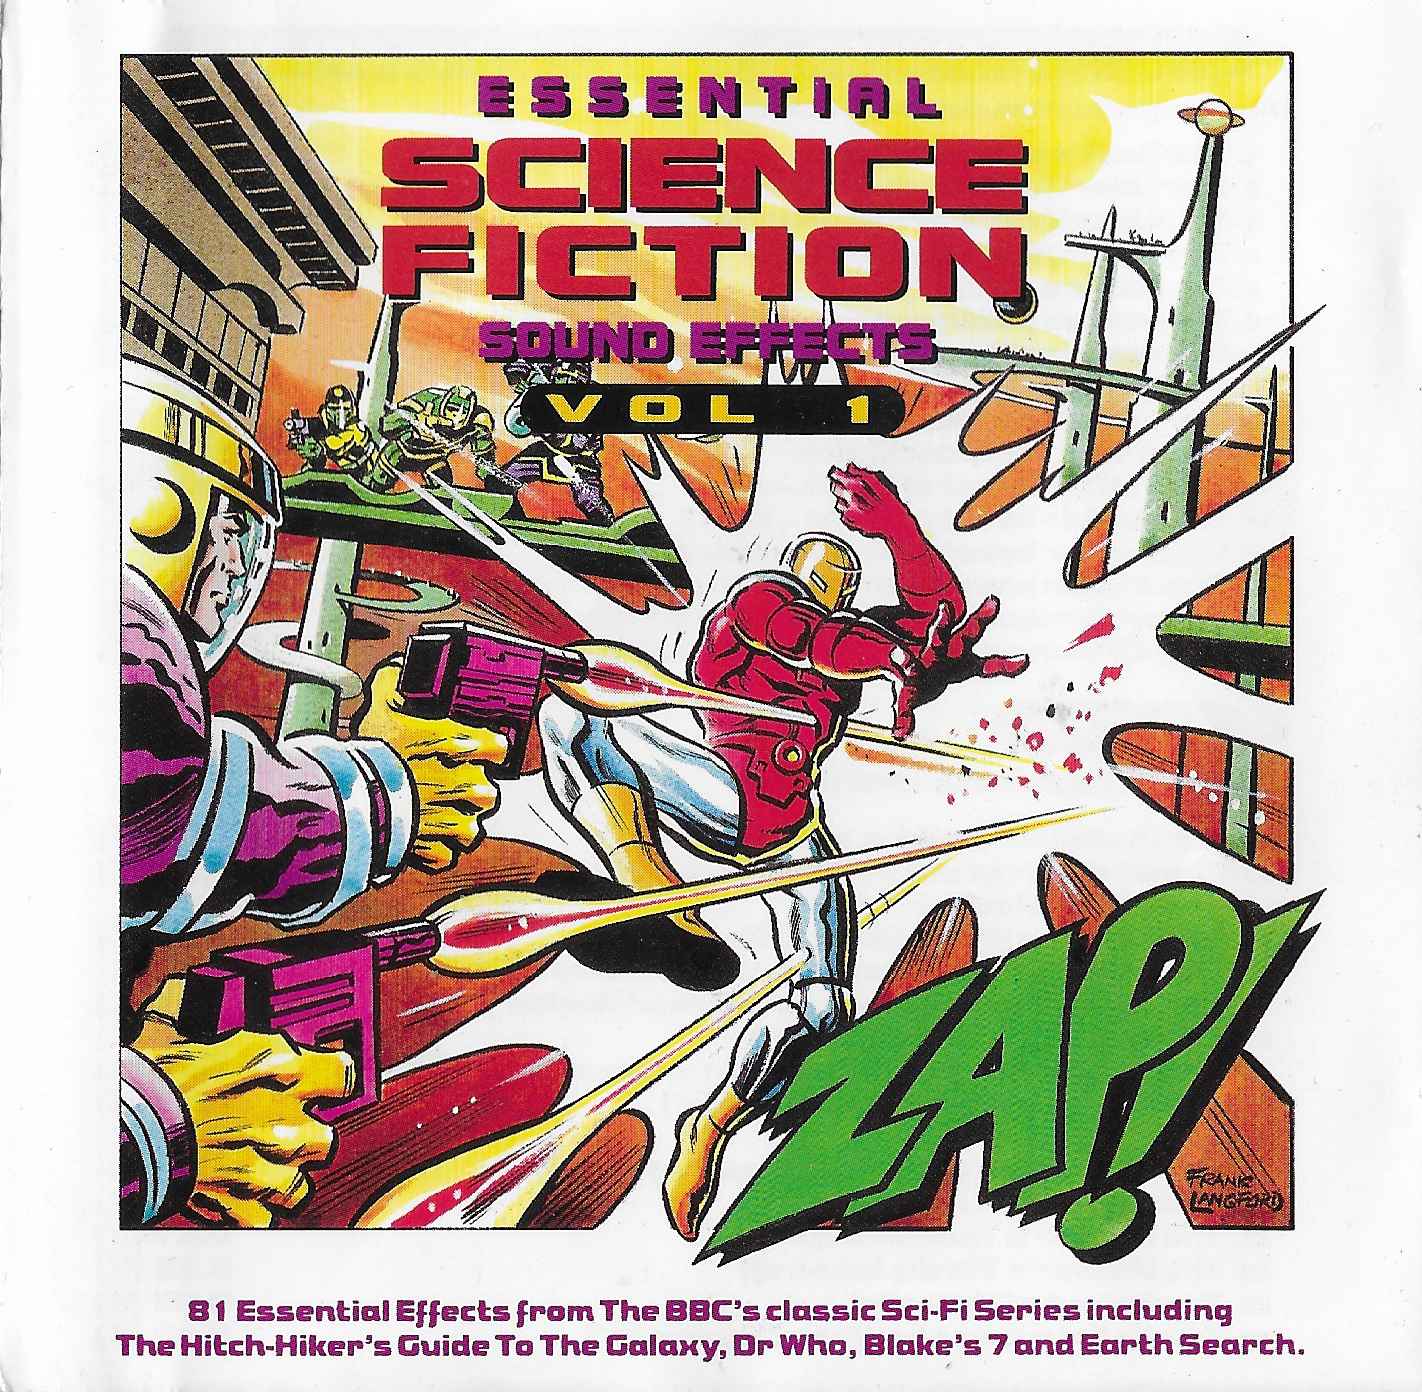 Picture of BBCCD847 Essential science-fiction sound effects - Volume 1 by artist BBC radiophonic workshop from the BBC cds - Records and Tapes library